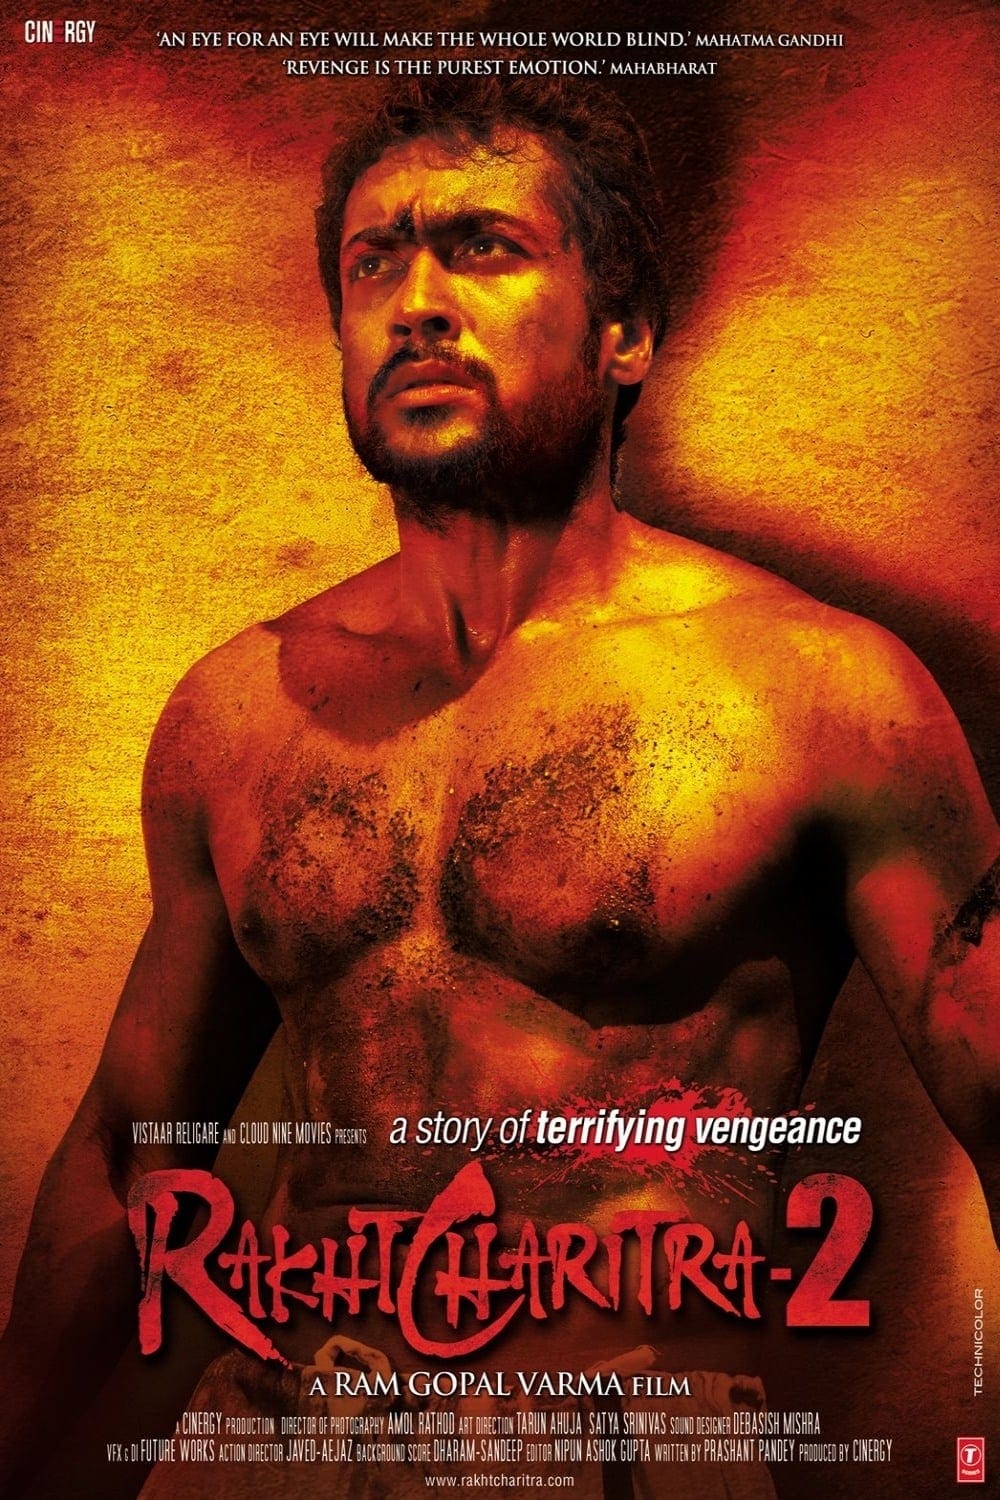 Poster for the movie "Rakht Charitra 2"